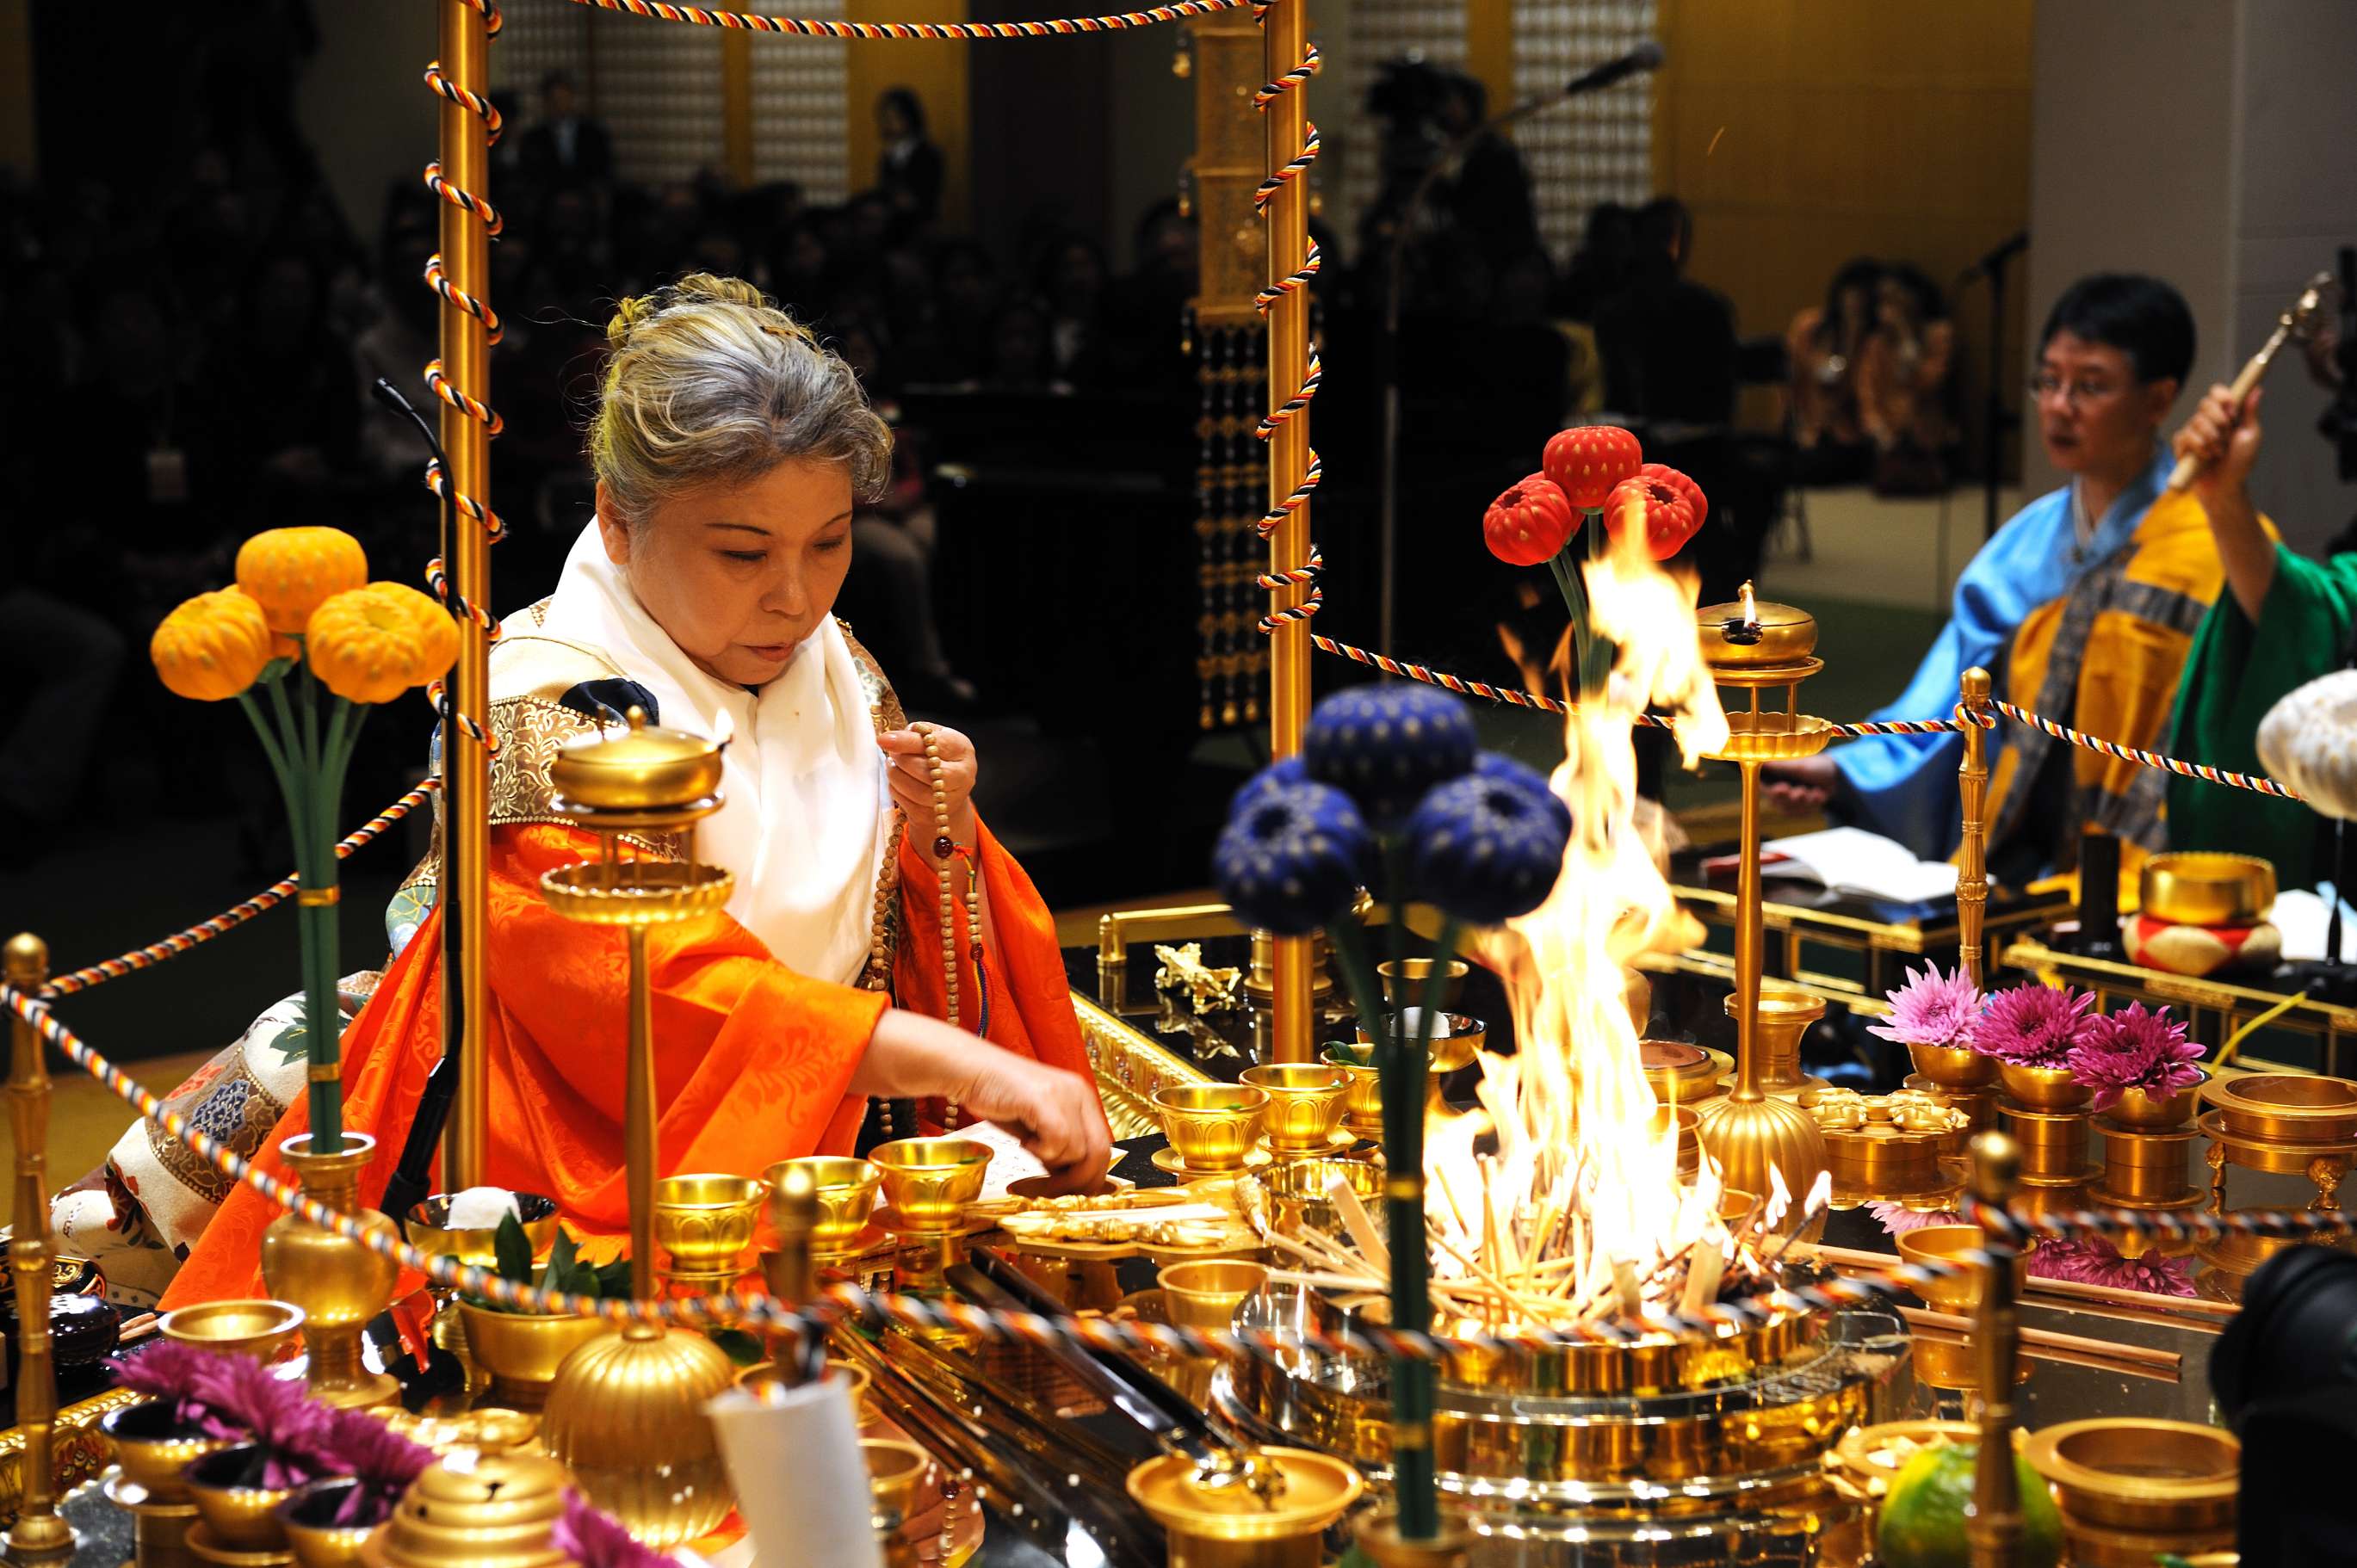 Her Holiness in orange ceremonial robes sits at a fire ceremony altar filled with golden ritual articles, offerings, and surrounded by a colored cord, reaching for something near a large flame.